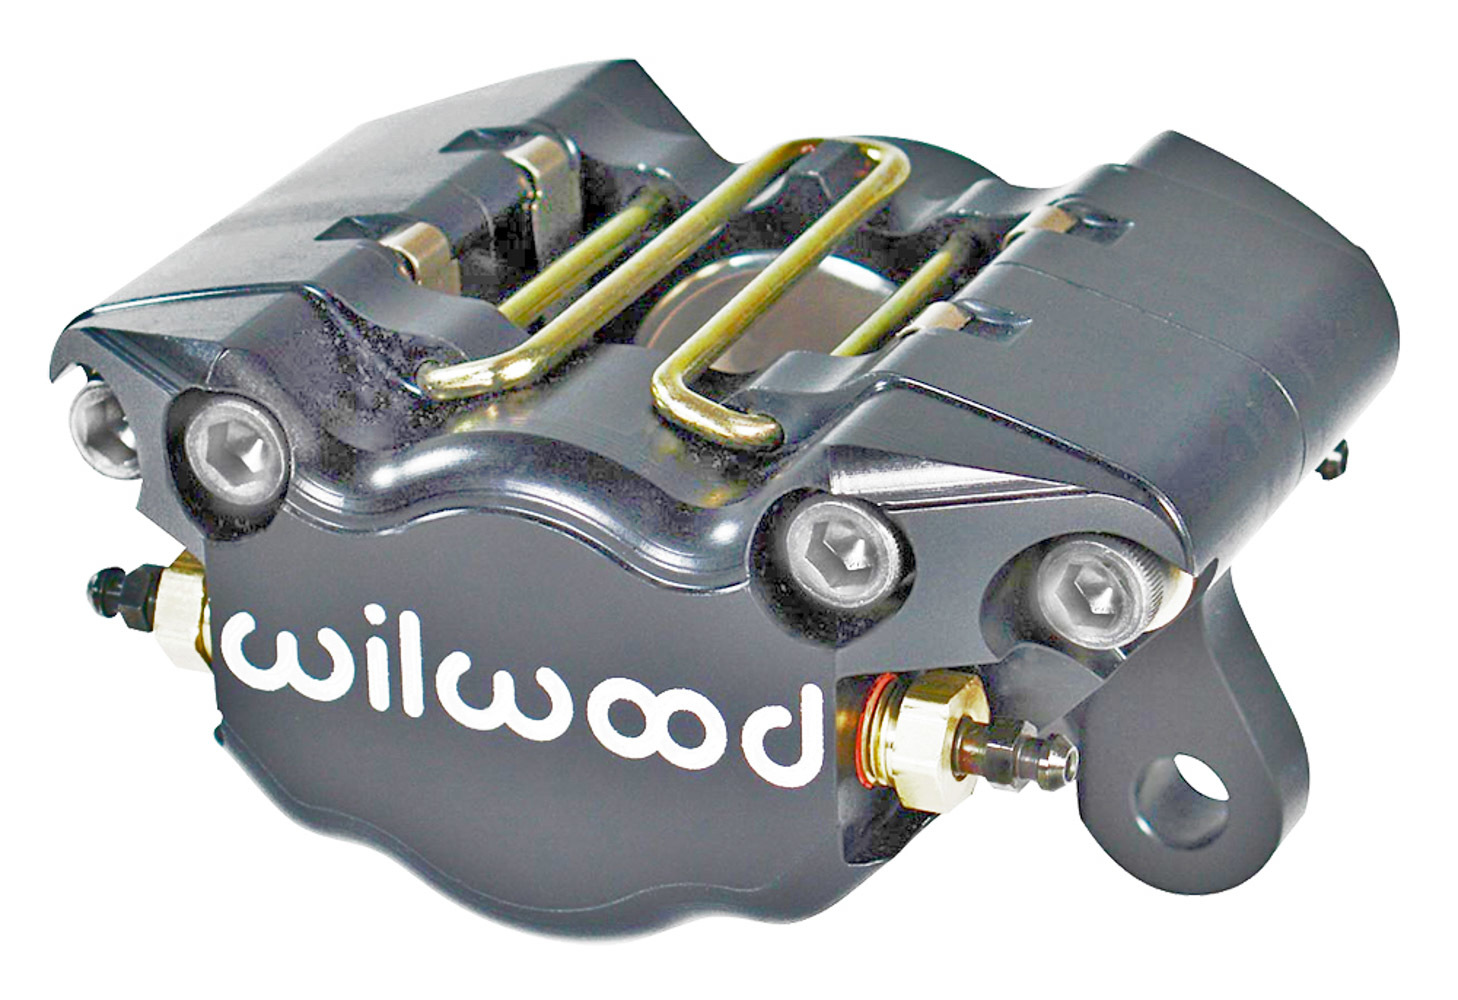 Wilwood 120-9689 Brake Caliper, Dynapro, 2 Piston, Billet Aluminum, Gray Anodized, 13.000 in OD x 0.380 in Thick Rotor, 3.750 in Lug Mount, Each